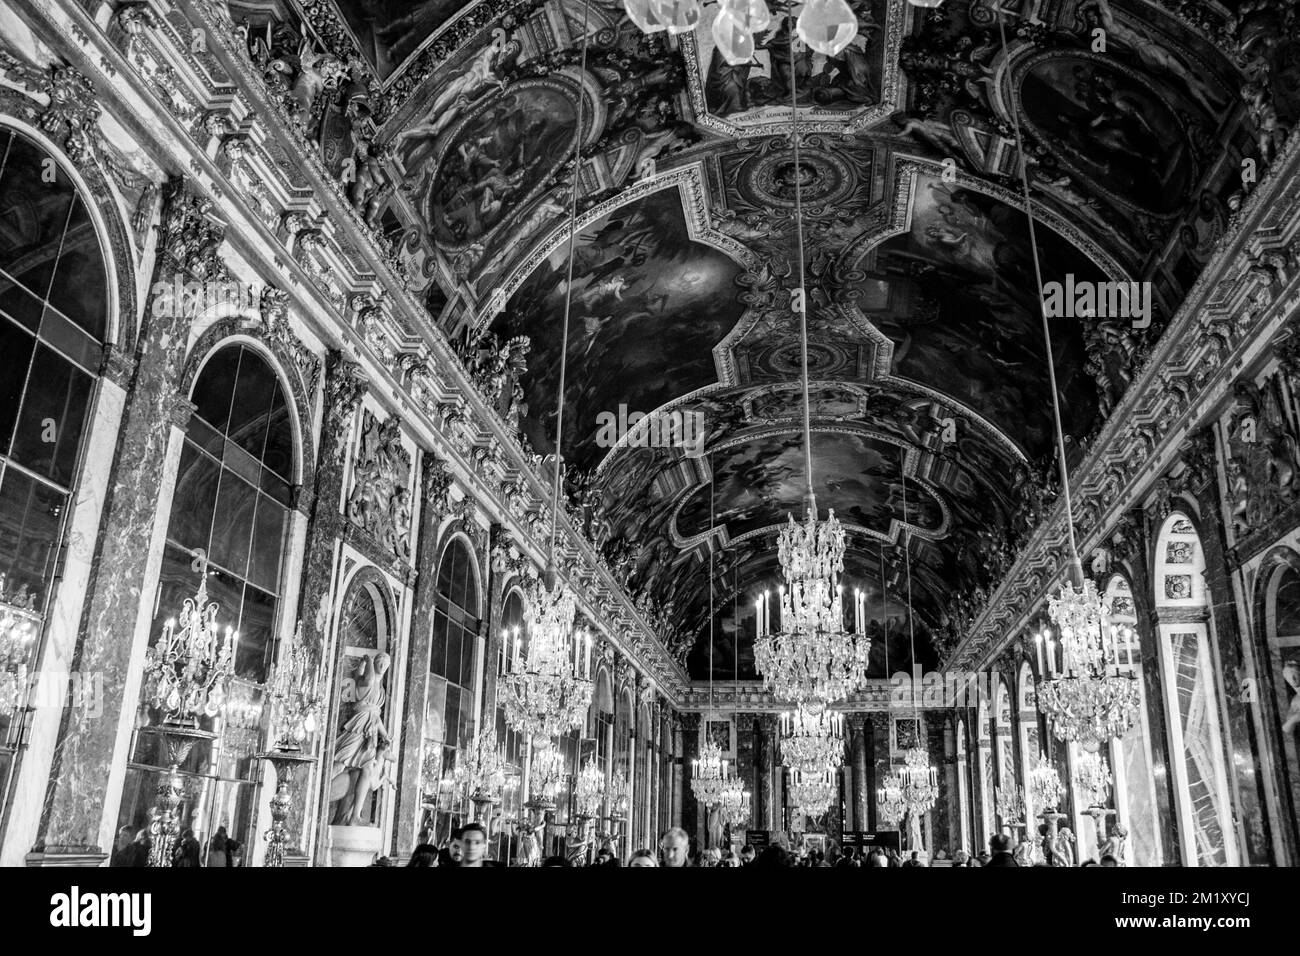 A grayscale of the luxurious Palace of Versailles interior with wall ornaments and candle chandeliers Stock Photo